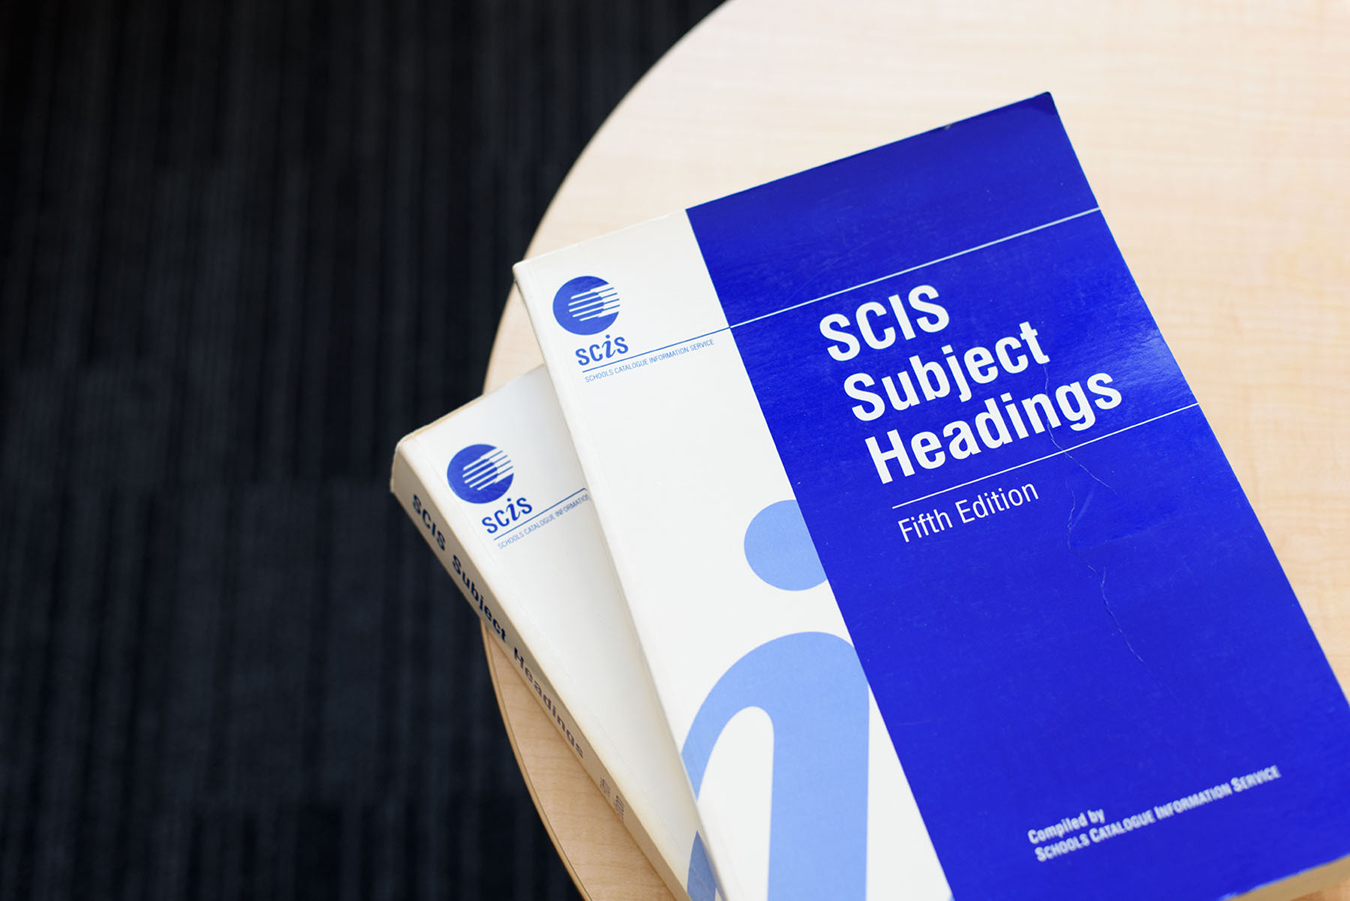 Two copies of SCIS Subject Heading: Fifth Edition on a table.